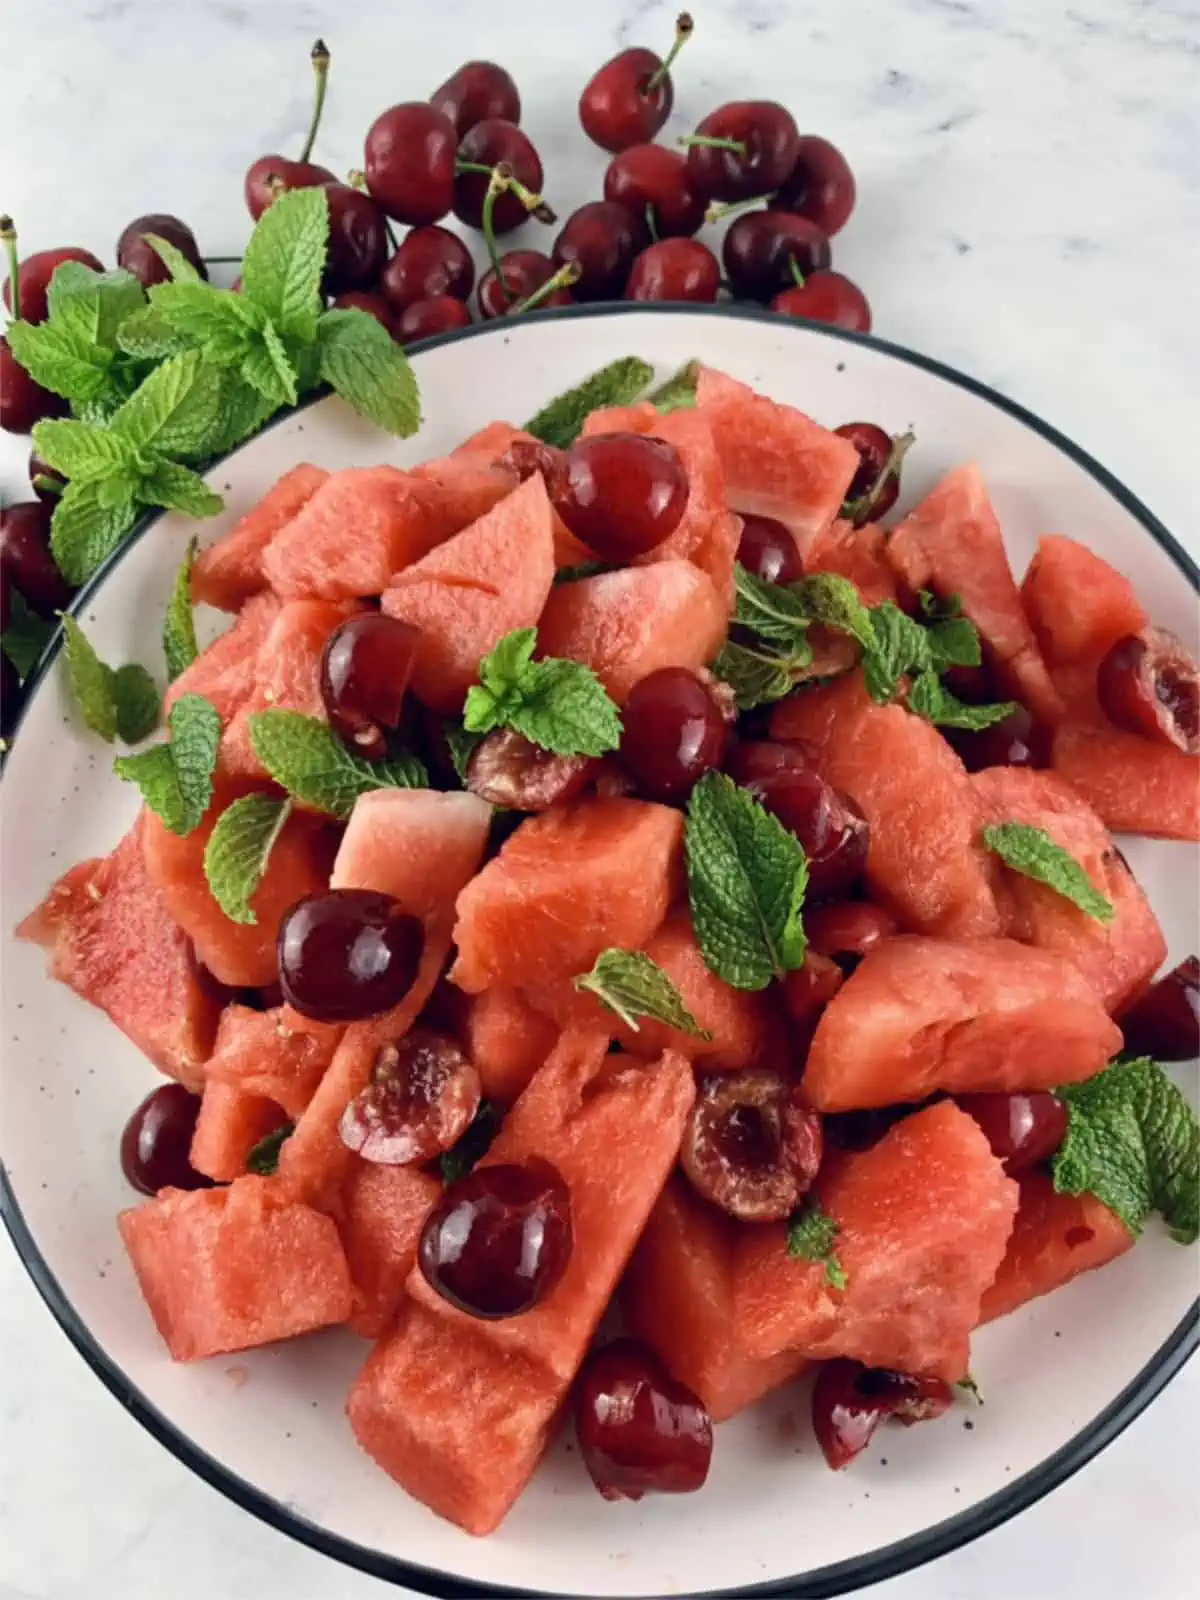 WATERMELON FRUIT SALAD ON A PLATTER WITH CHERRIES AND MINT ON THE SIDE